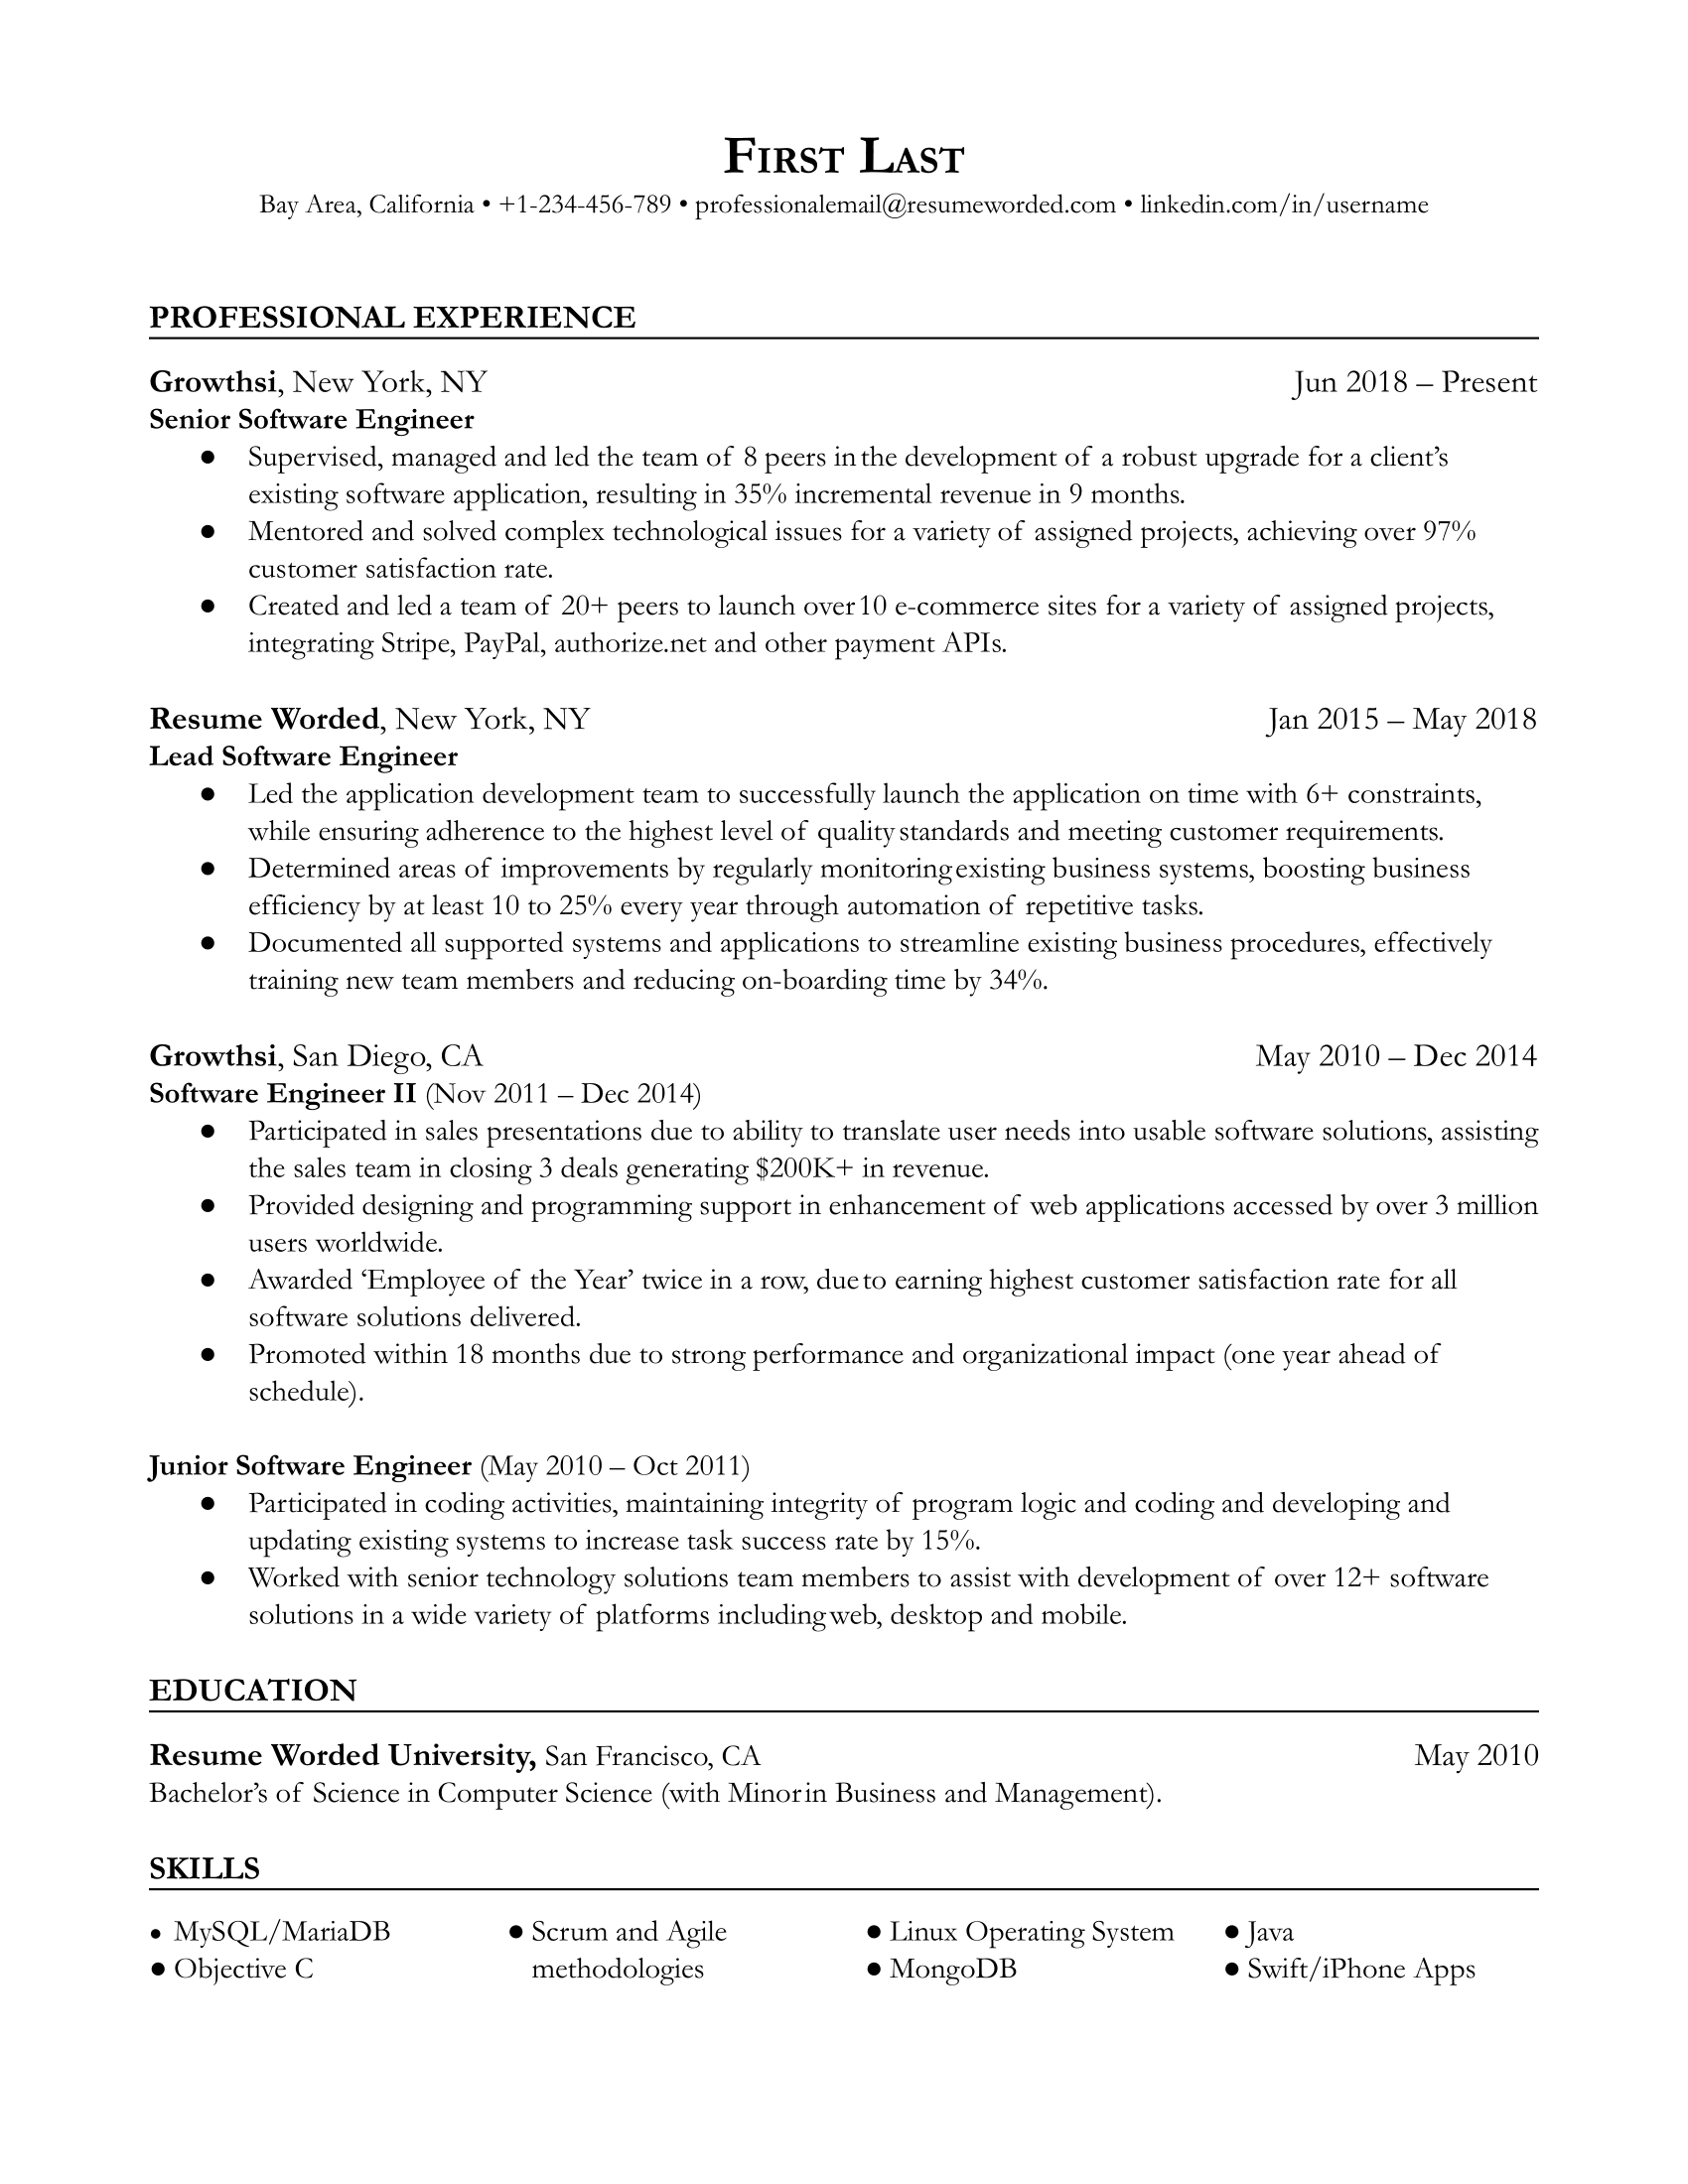 A resume for a senior software engineer with a degree in computer science and prior experience as a software engineer II.